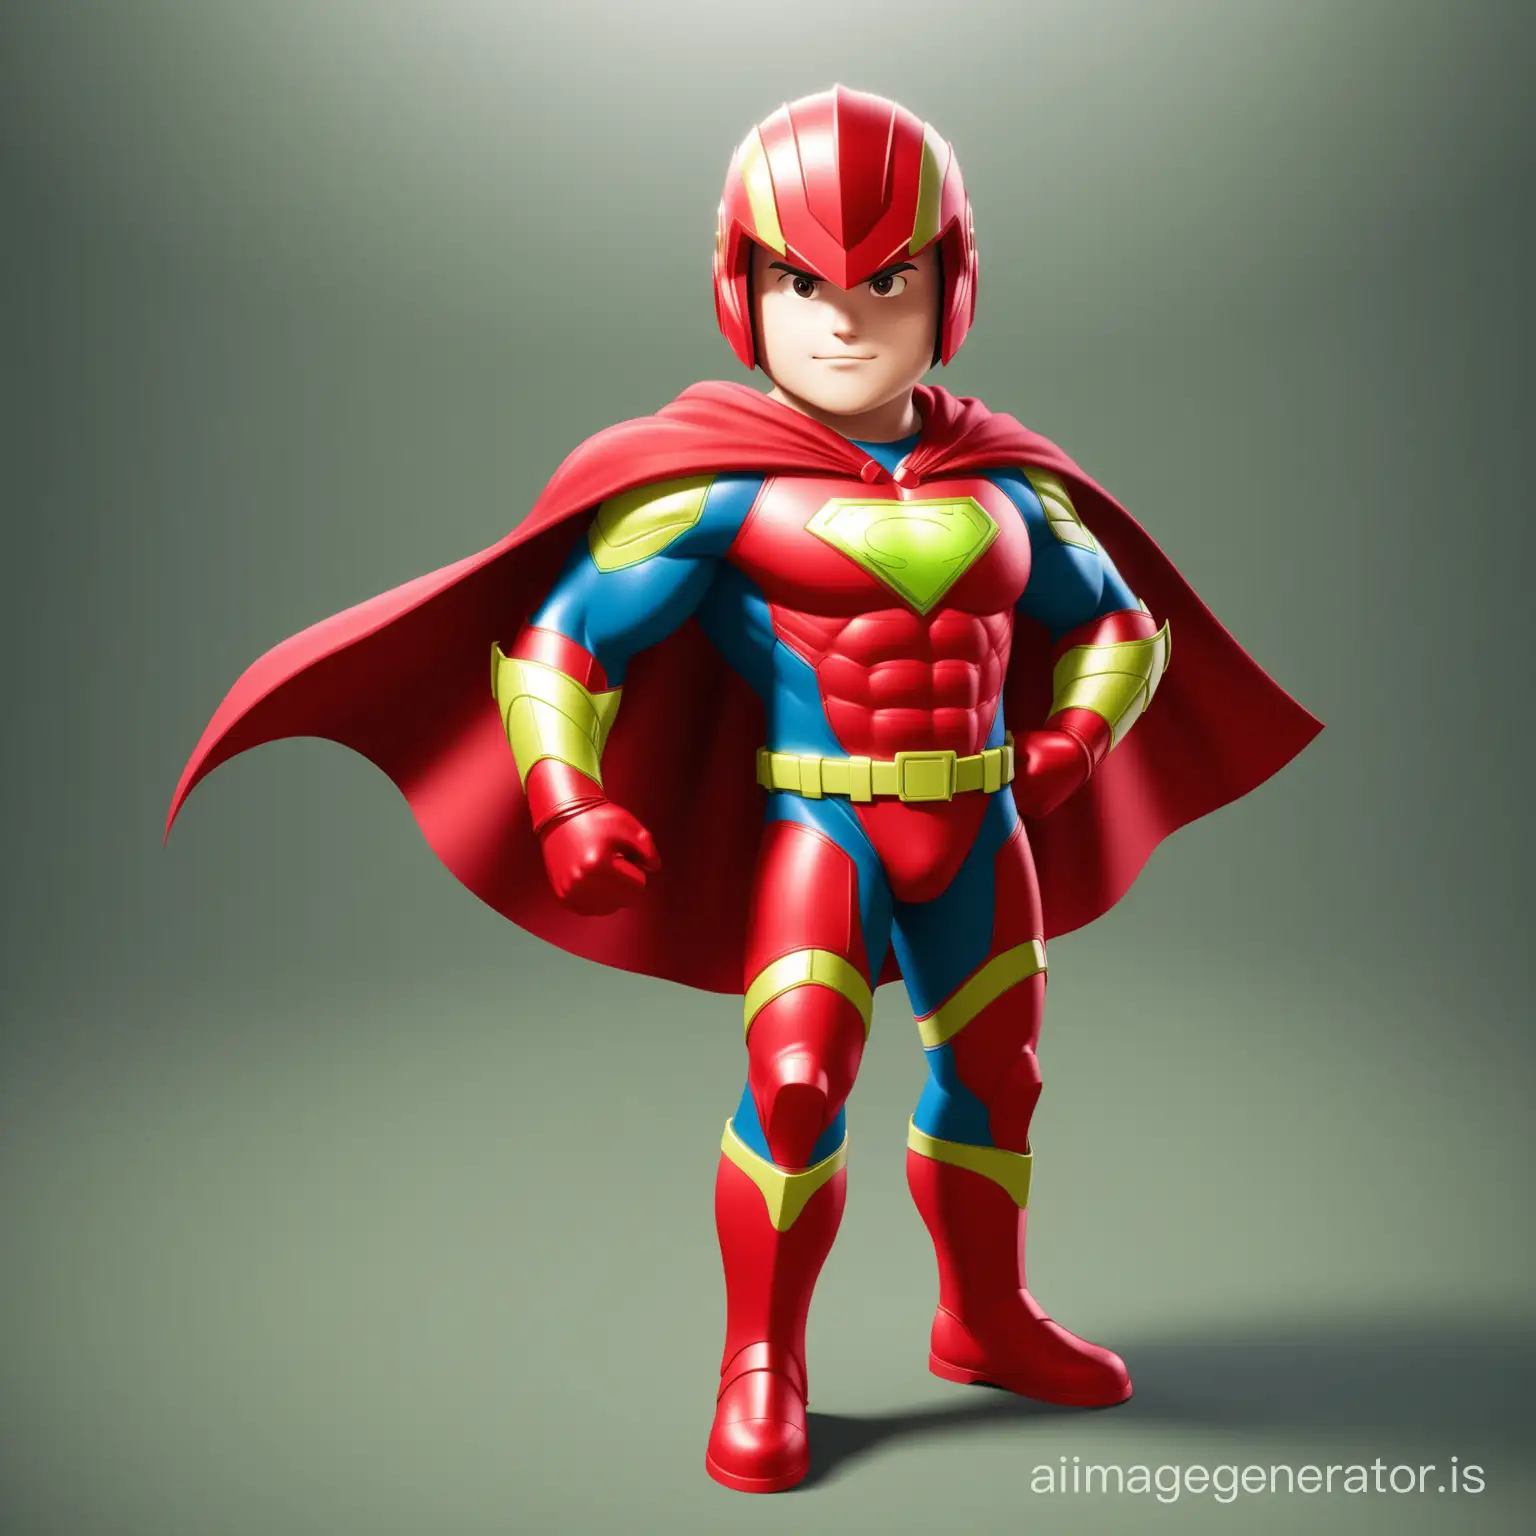 cgi character of super hero recycling warrior. Should be wearing a red cape and red helmet